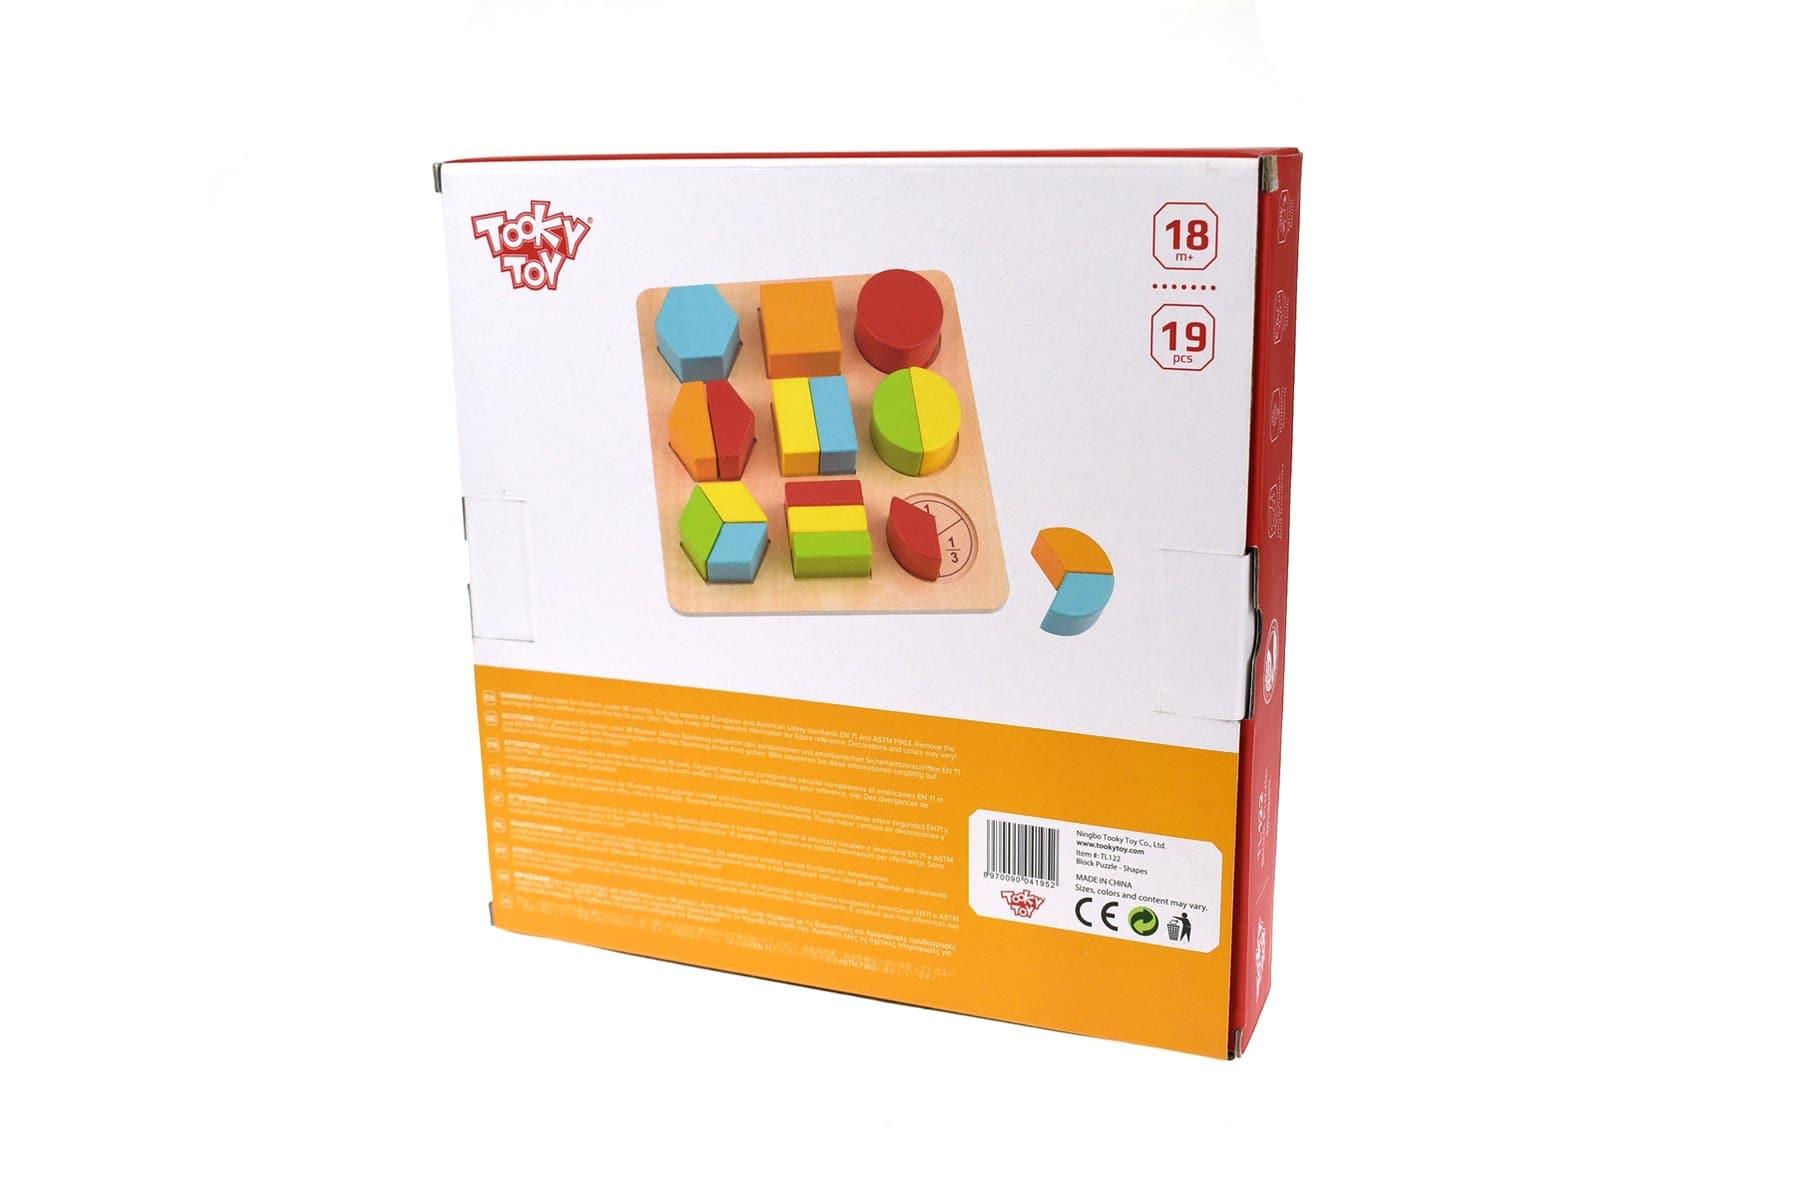 toys for infant Block Puzzle - Shapes